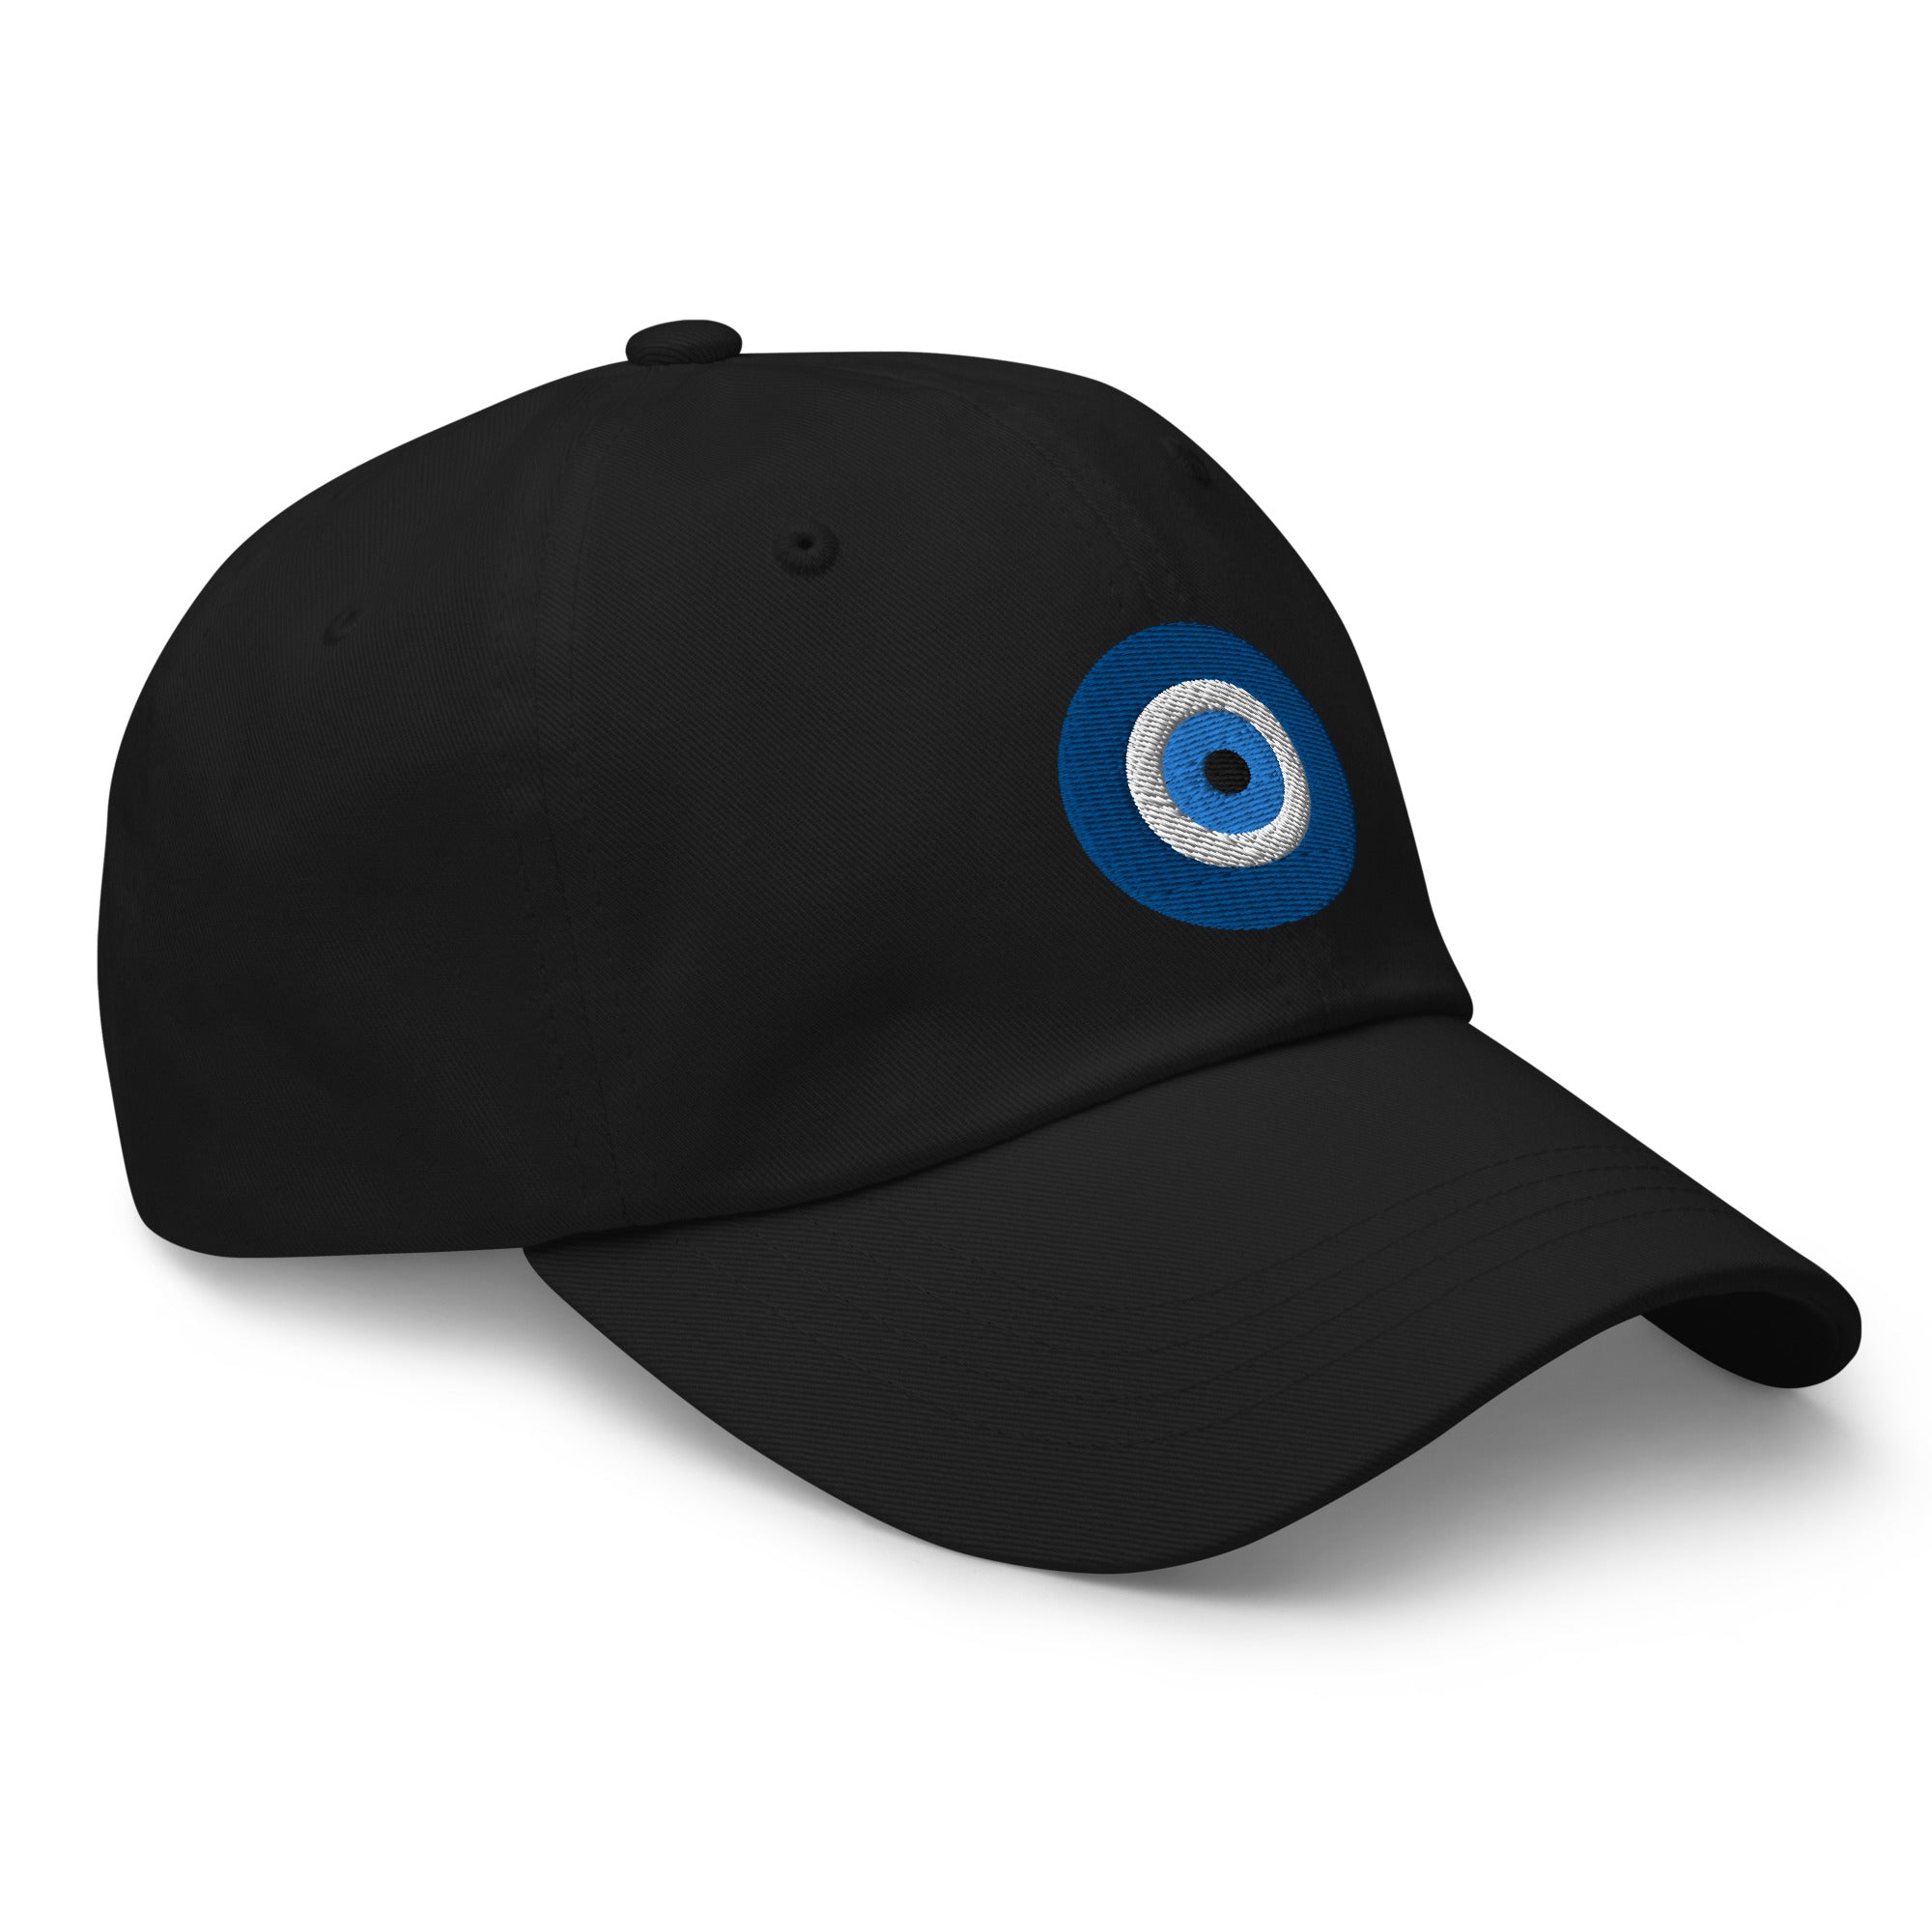 The Evil Eye Embroidered Baseball Cap Supernatural Look or Stare Dad hat - Edge of Life Designs